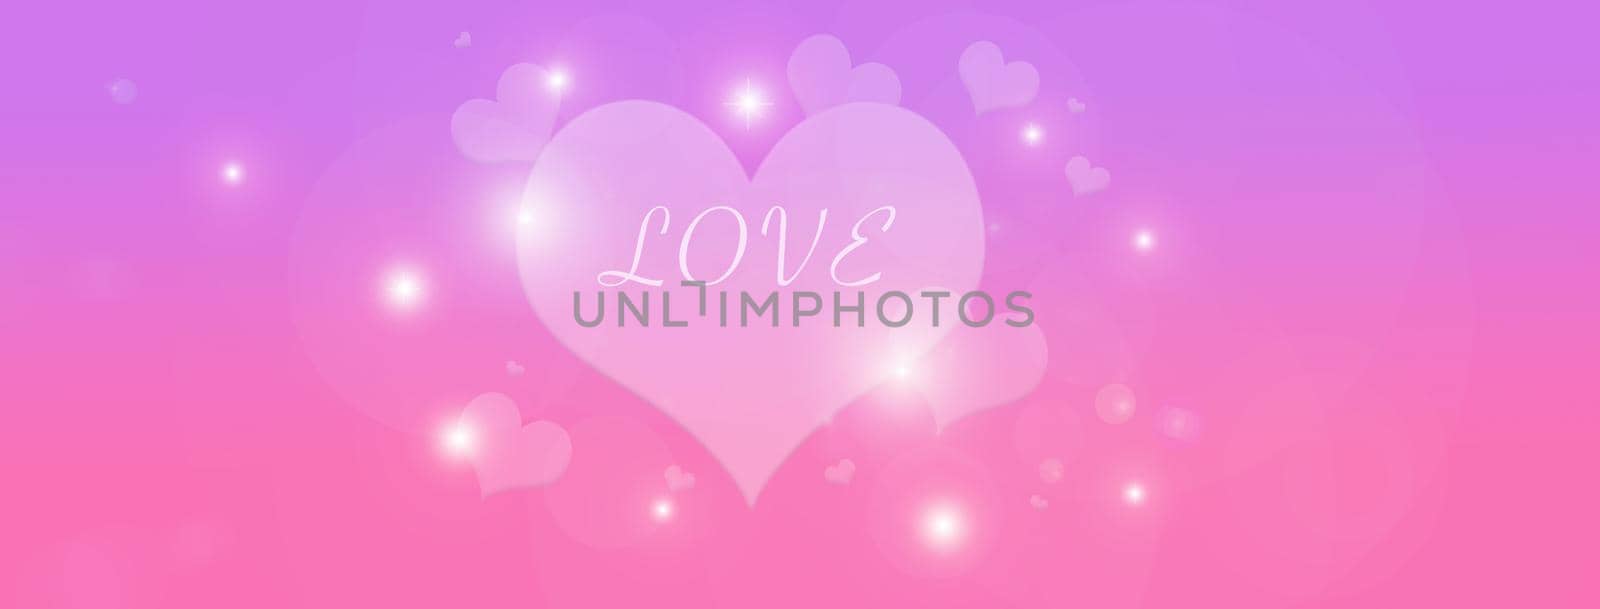 Valentine Card Graphic. Hearts and Circle on pink gradient background with the word LOVE. by sCukrov